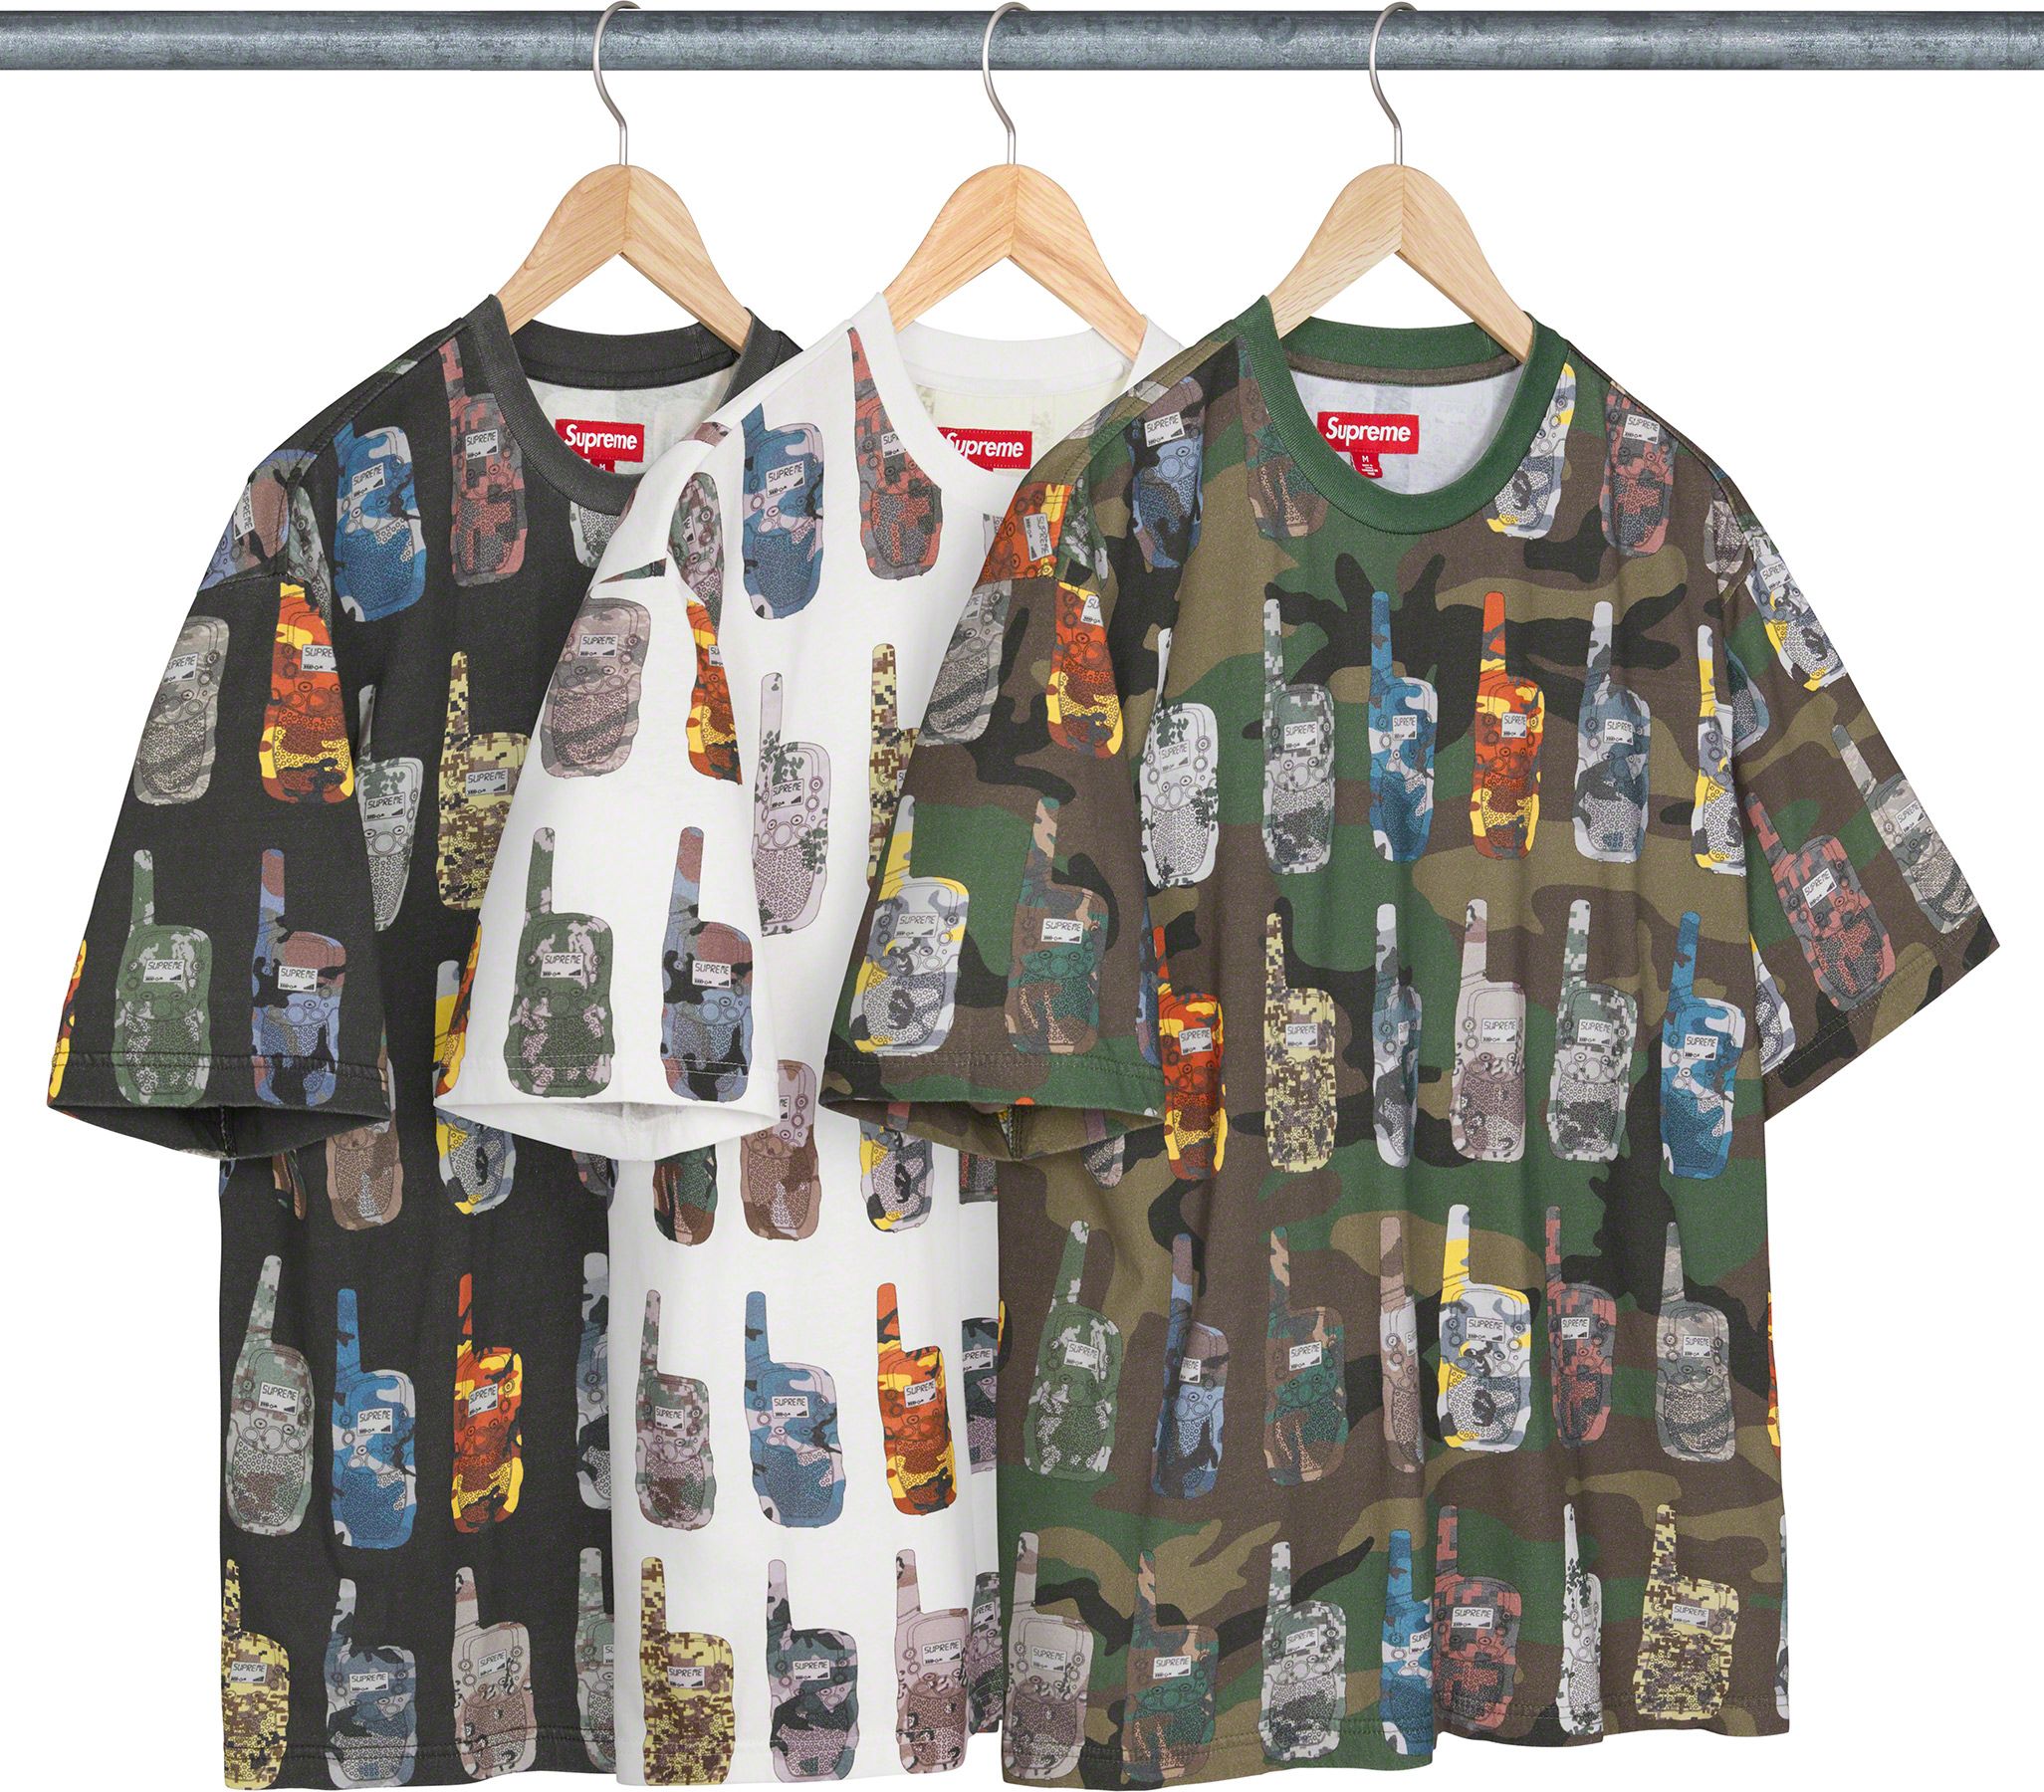 Overprint Knockout S/S Top - Fall/Winter 2023 Preview – Supreme